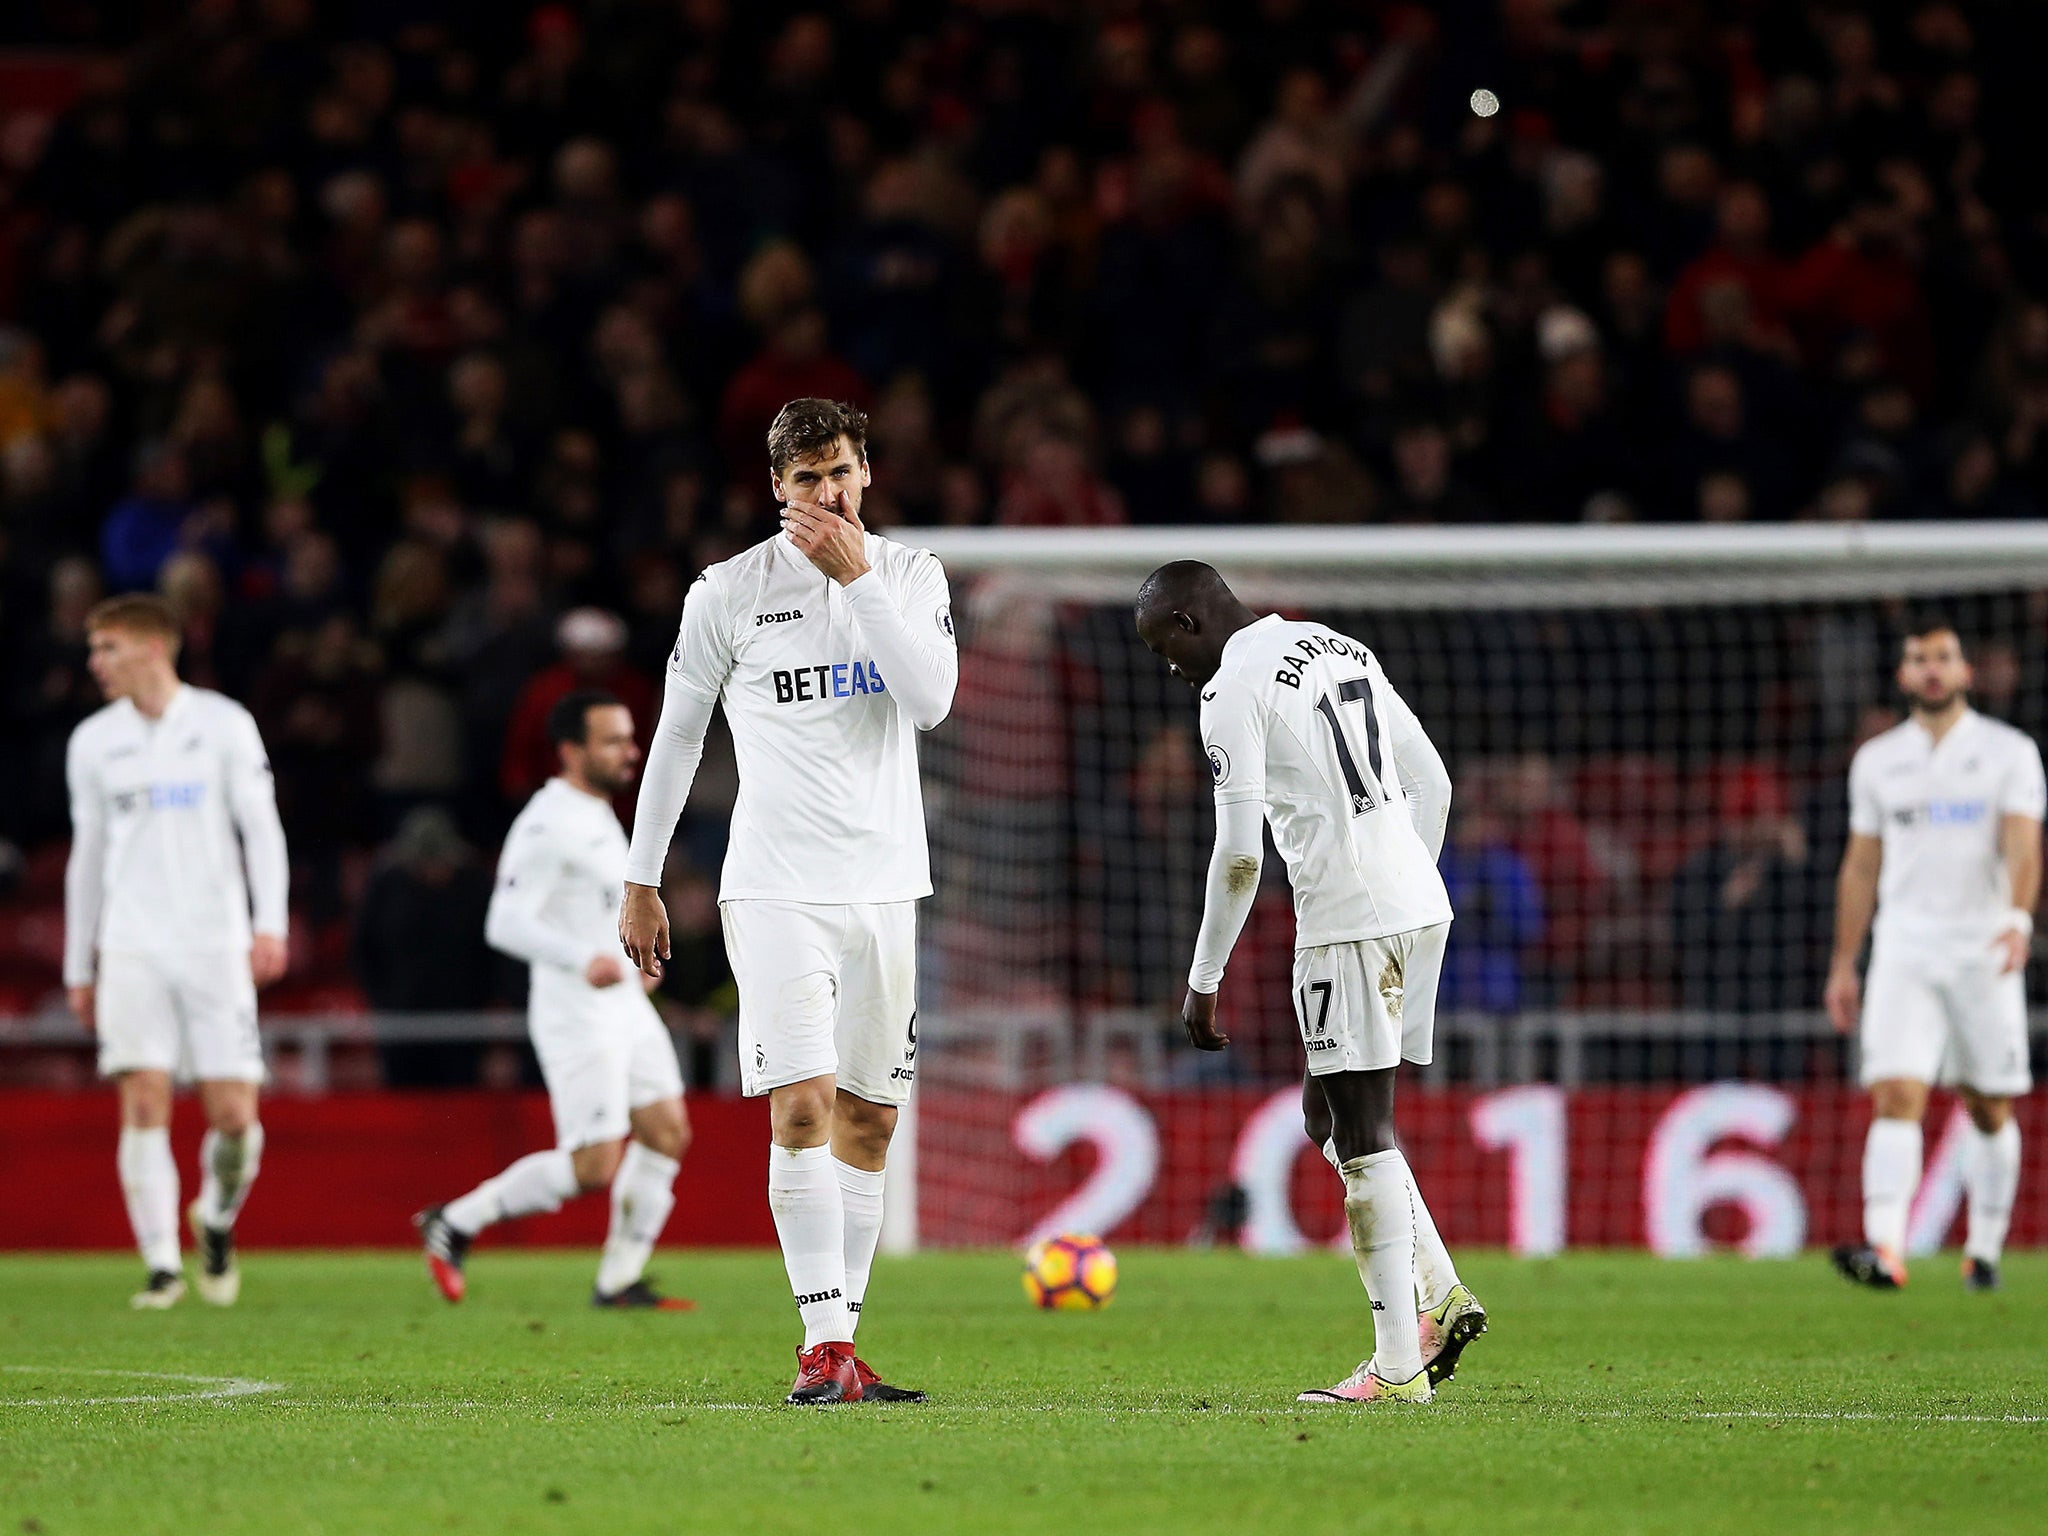 Swansea are now second-bottom, three points off safety